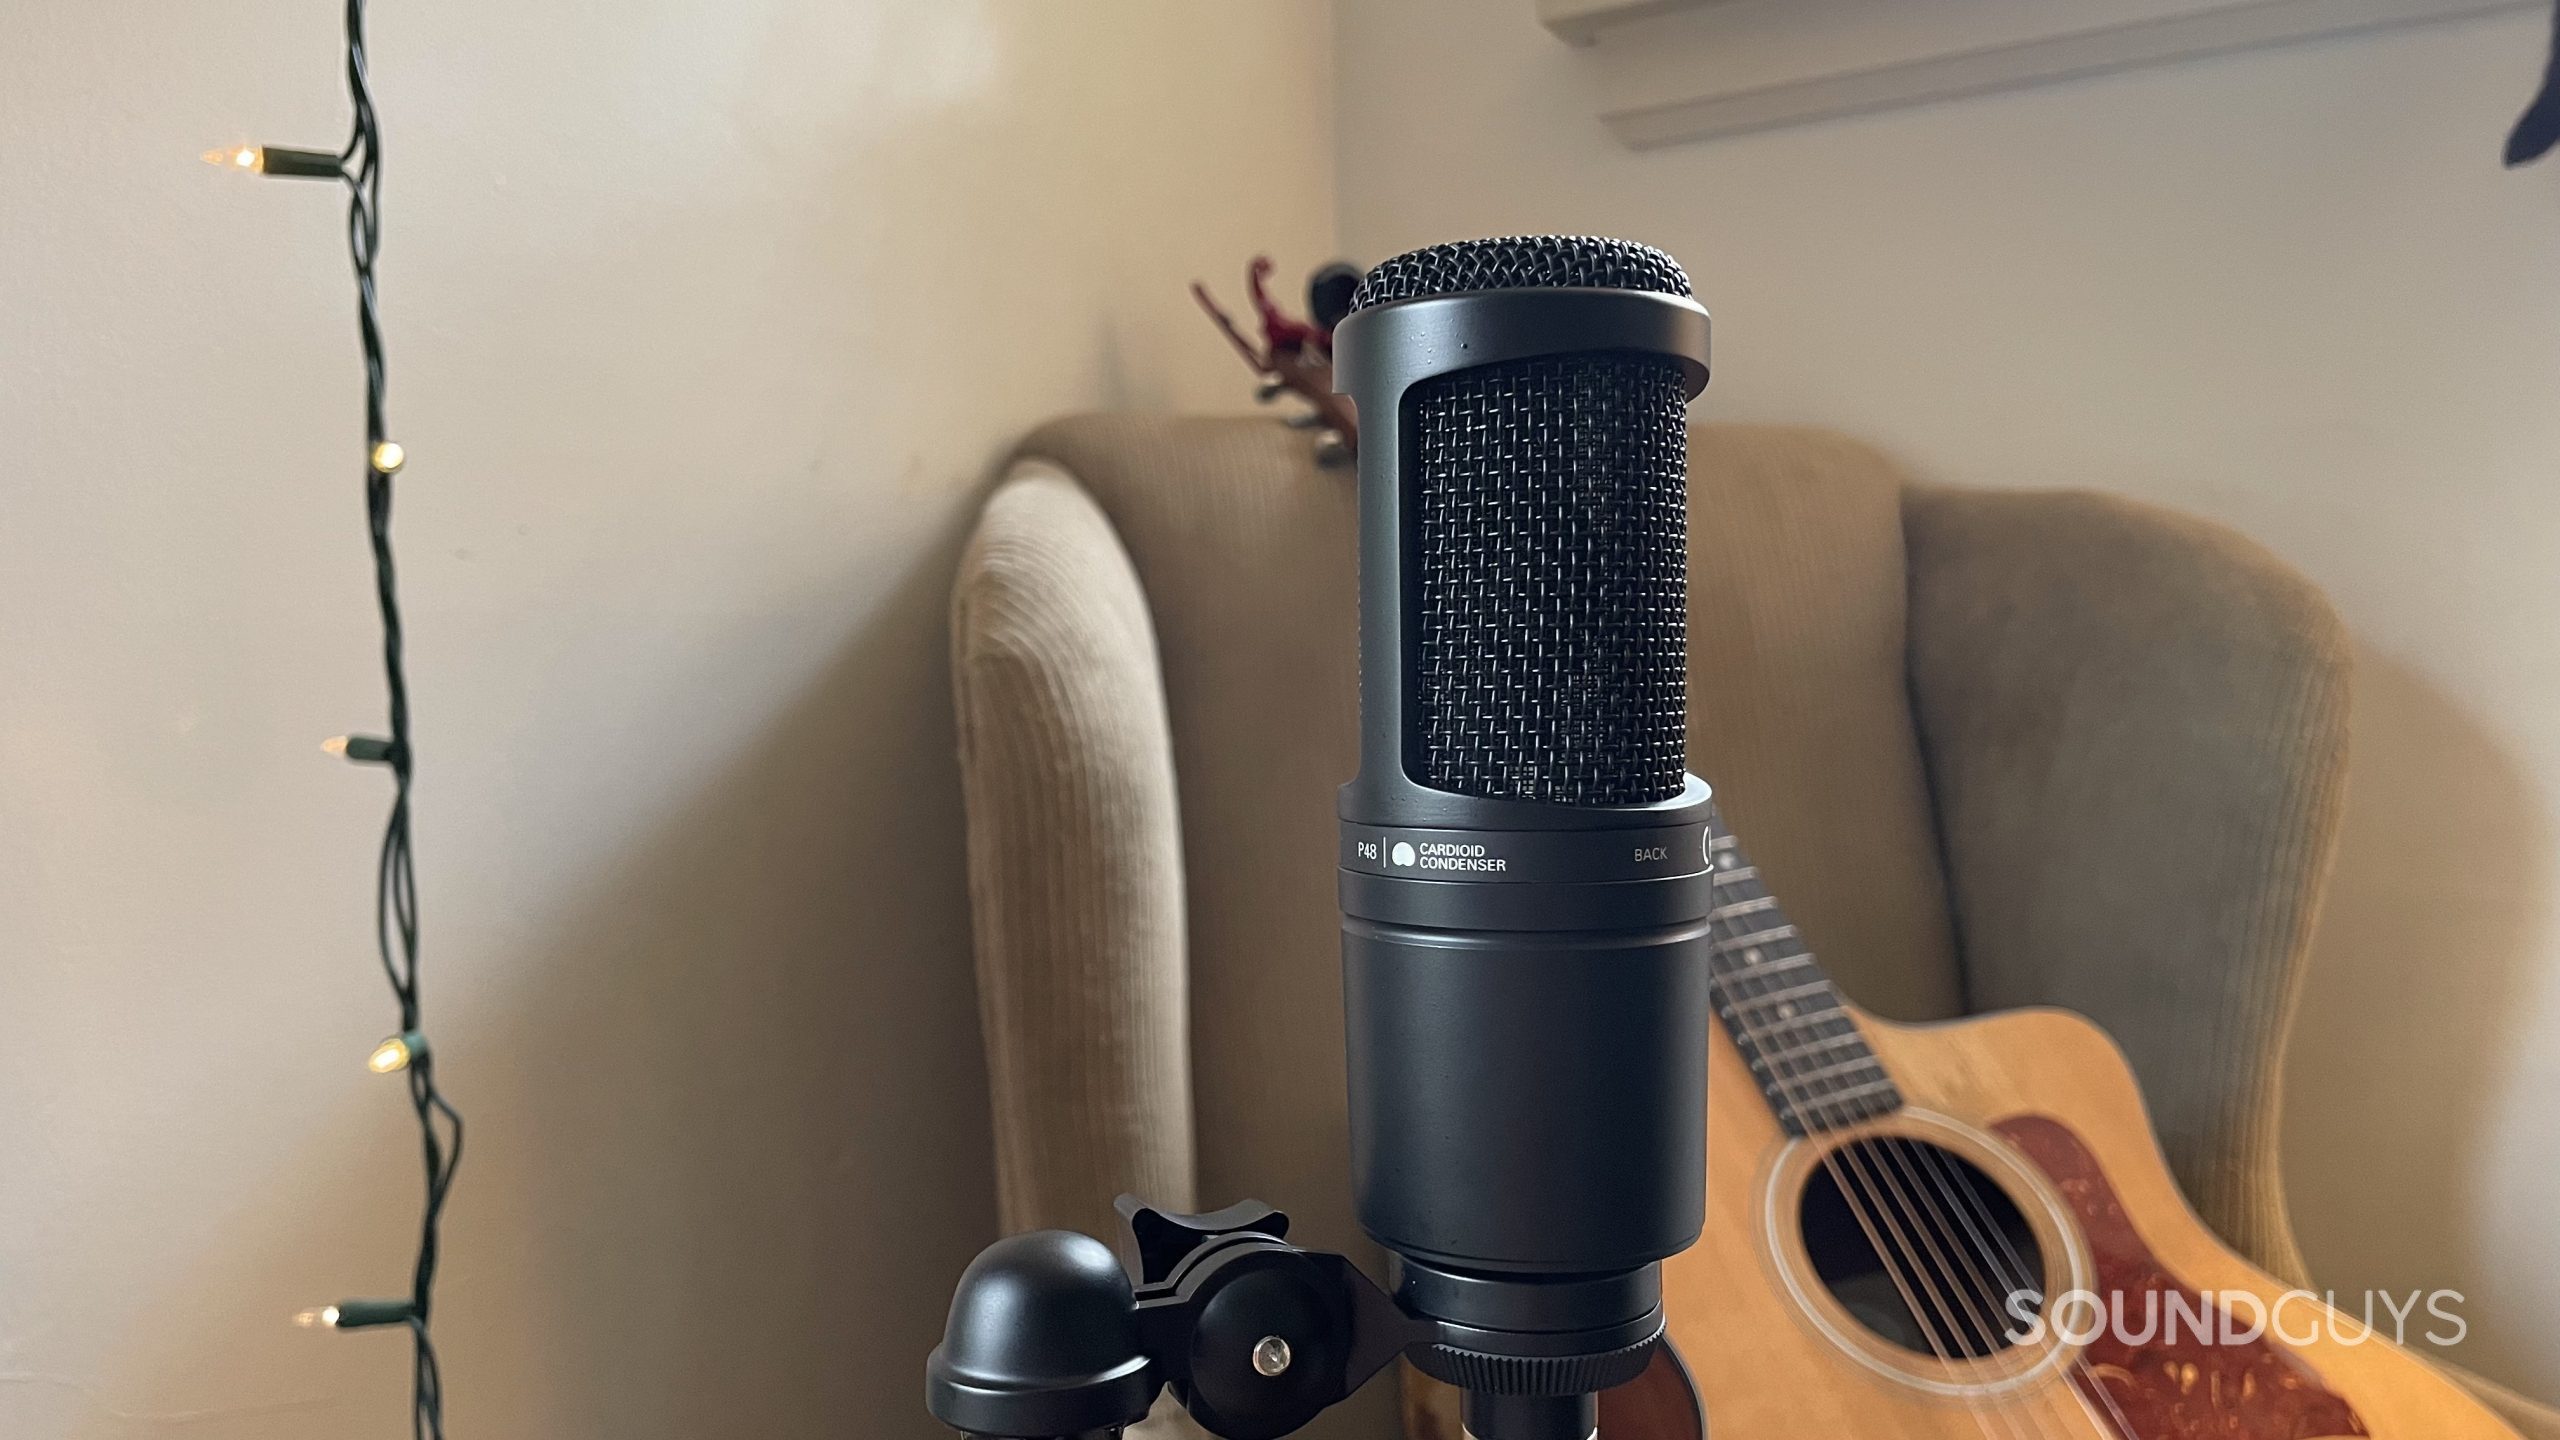 Audio-Technica AT2020 with a string of lights and an acoustic guitar resting on an armchair in the background.